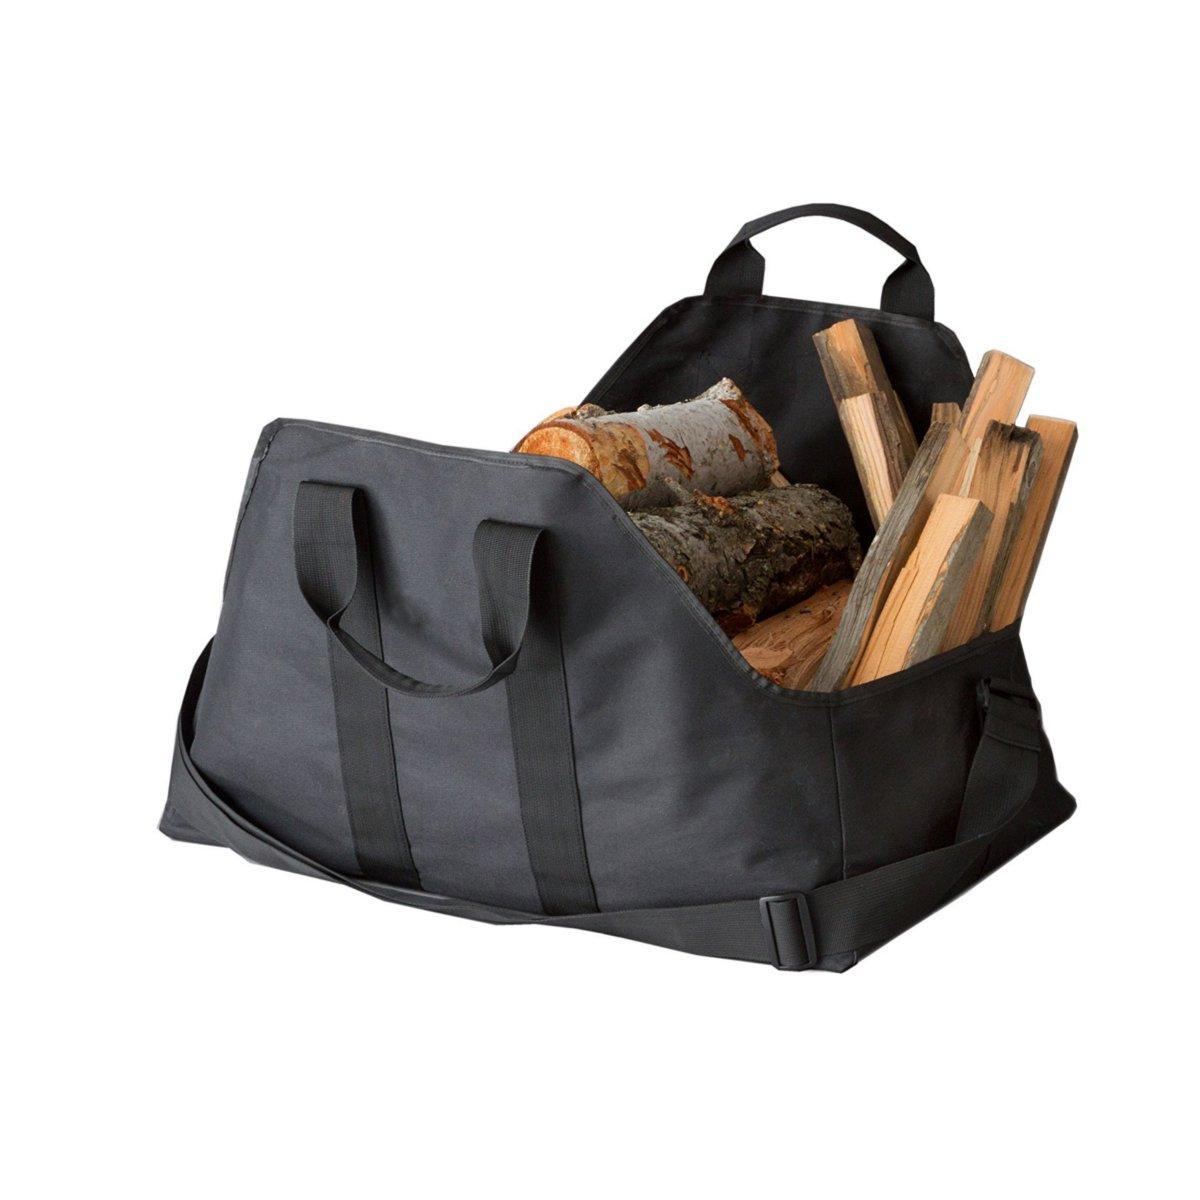 Outdoor Portable Firewood Log Carrier Bag Camping BBQ Wood Holder Storage Pouch Tote Organizer